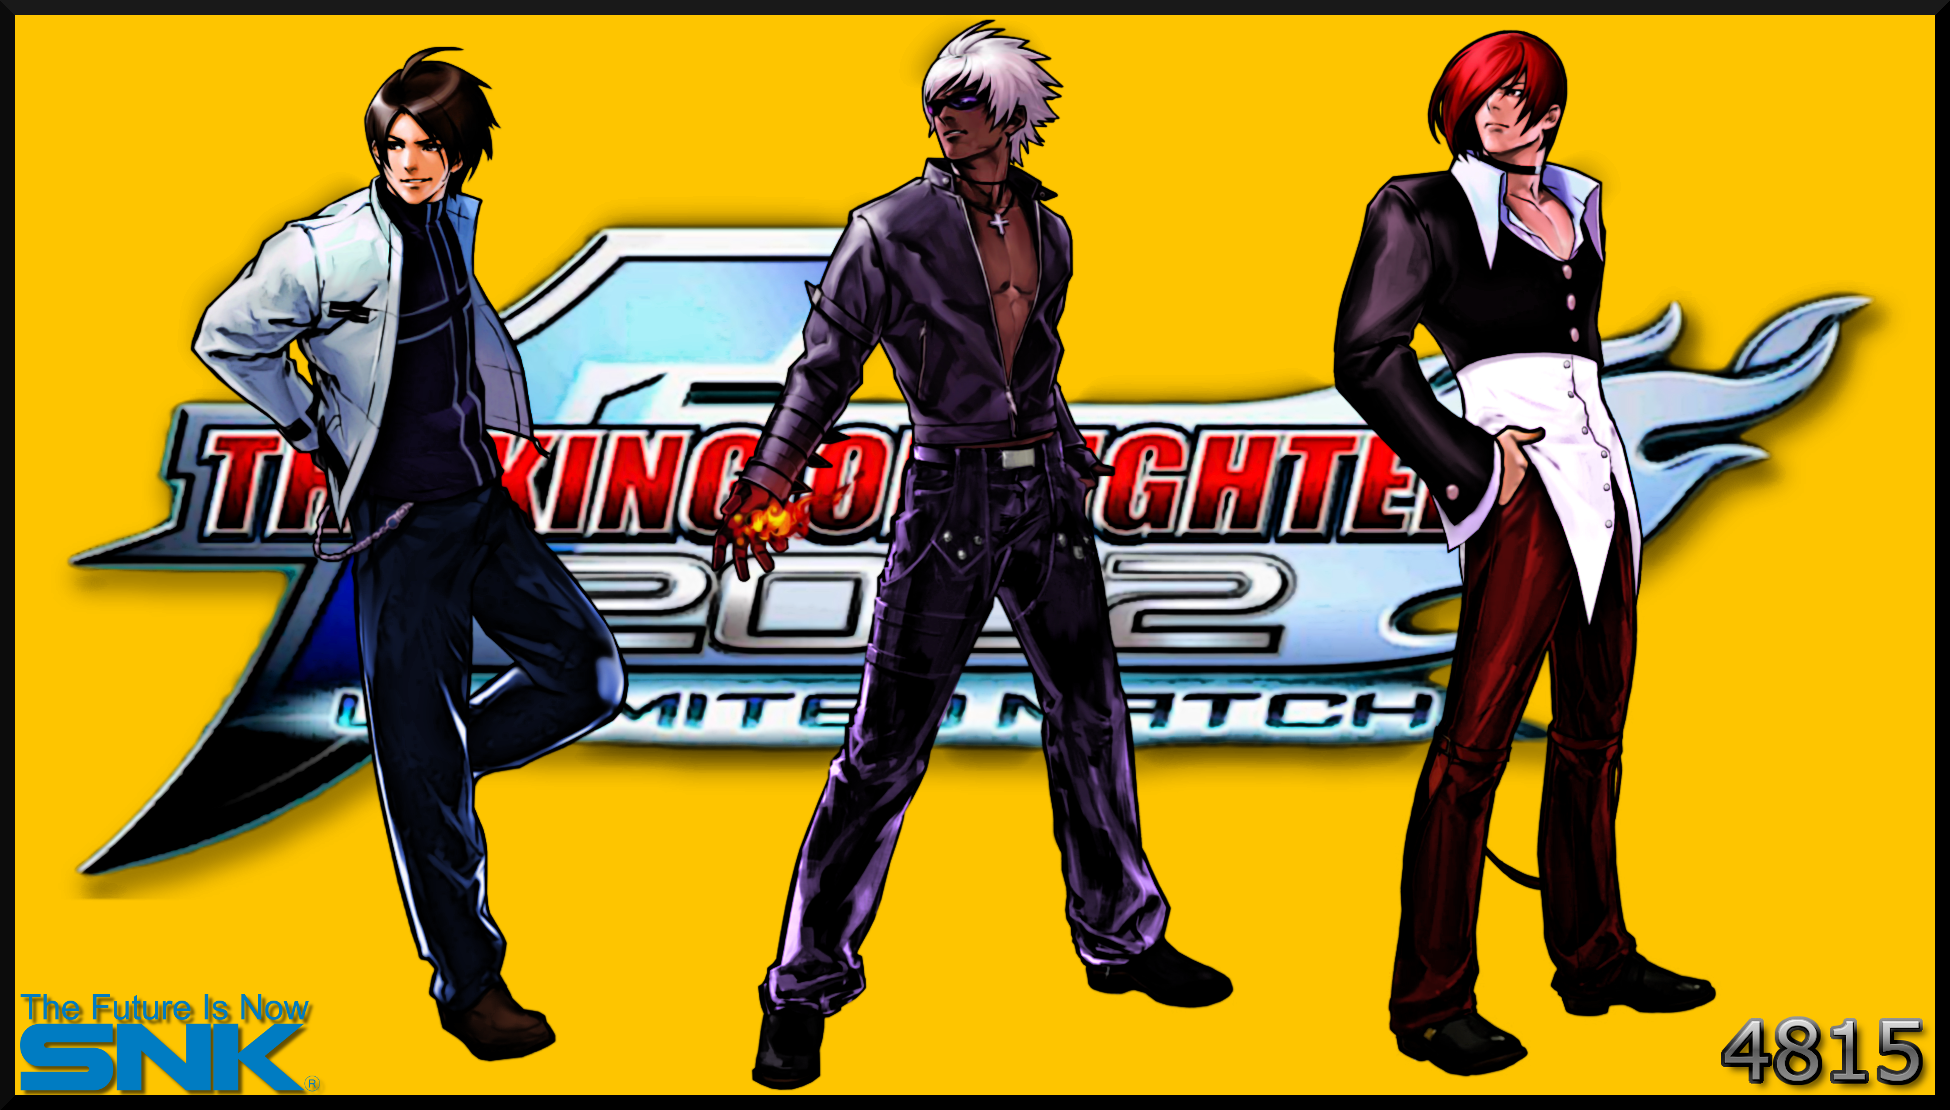 King of Fighters 2002 Unlimited Match - 3 Heroes by topdog4815 on DeviantArt